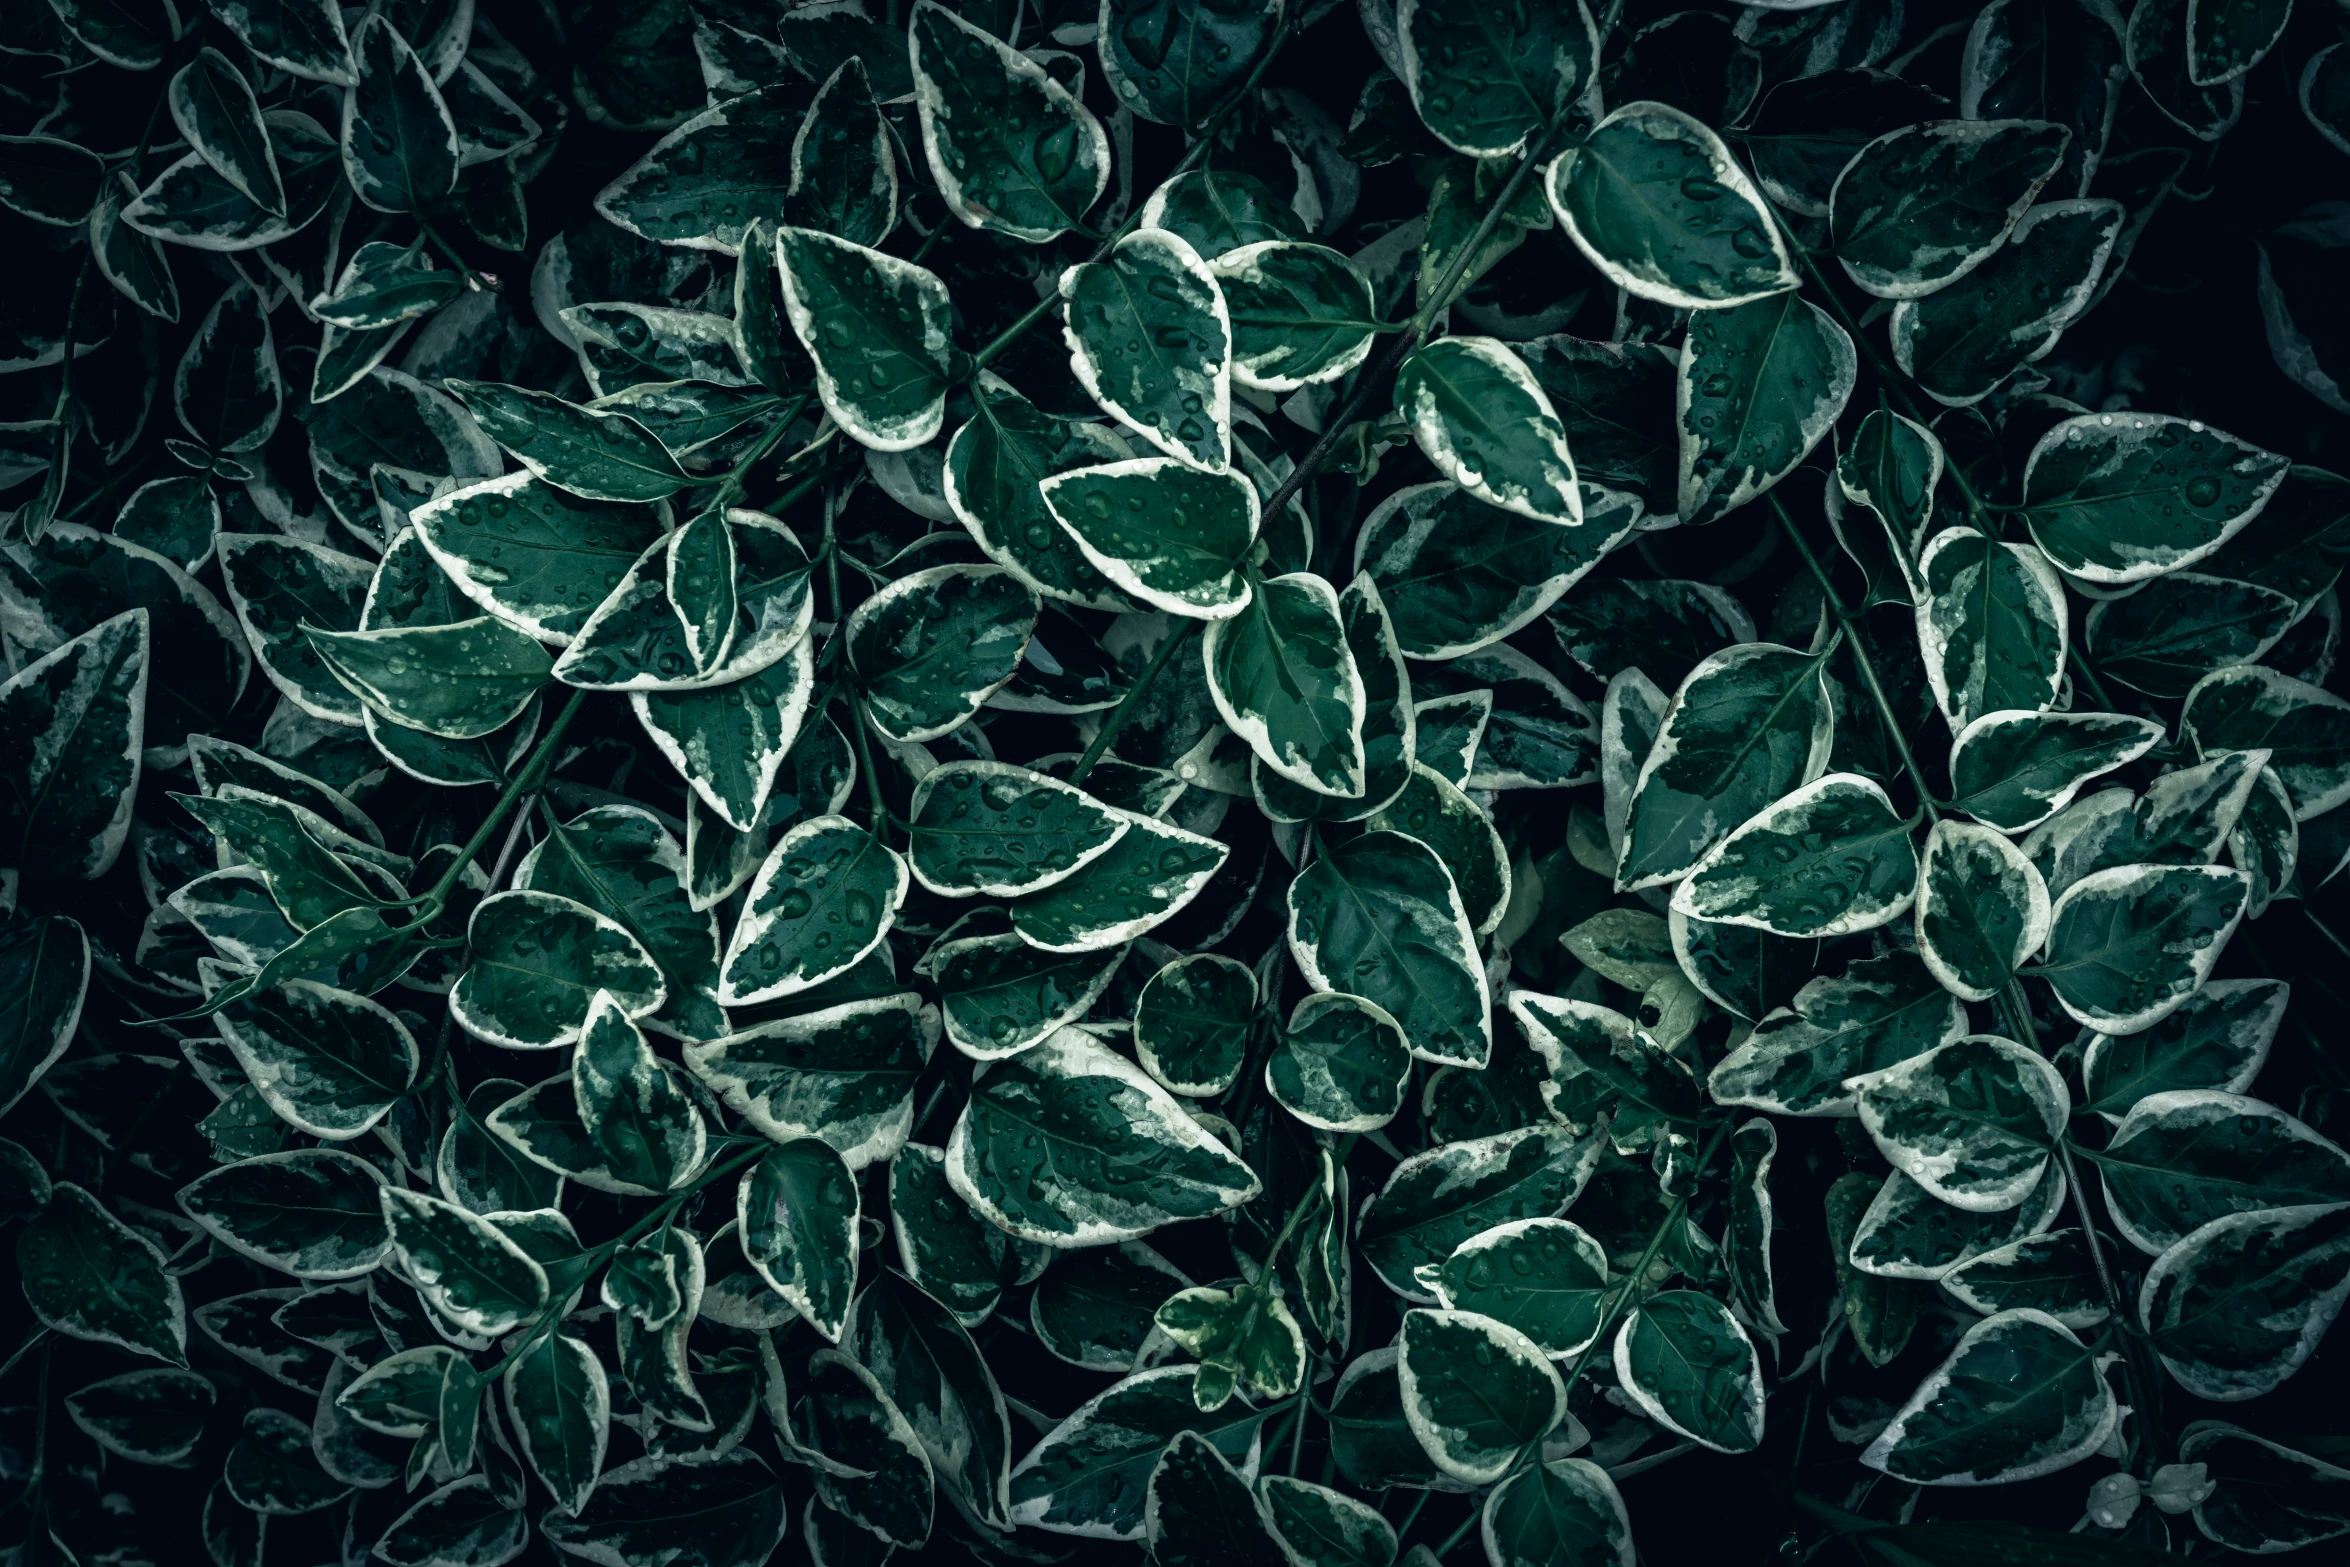 green leaves are arranged in an abstract manner